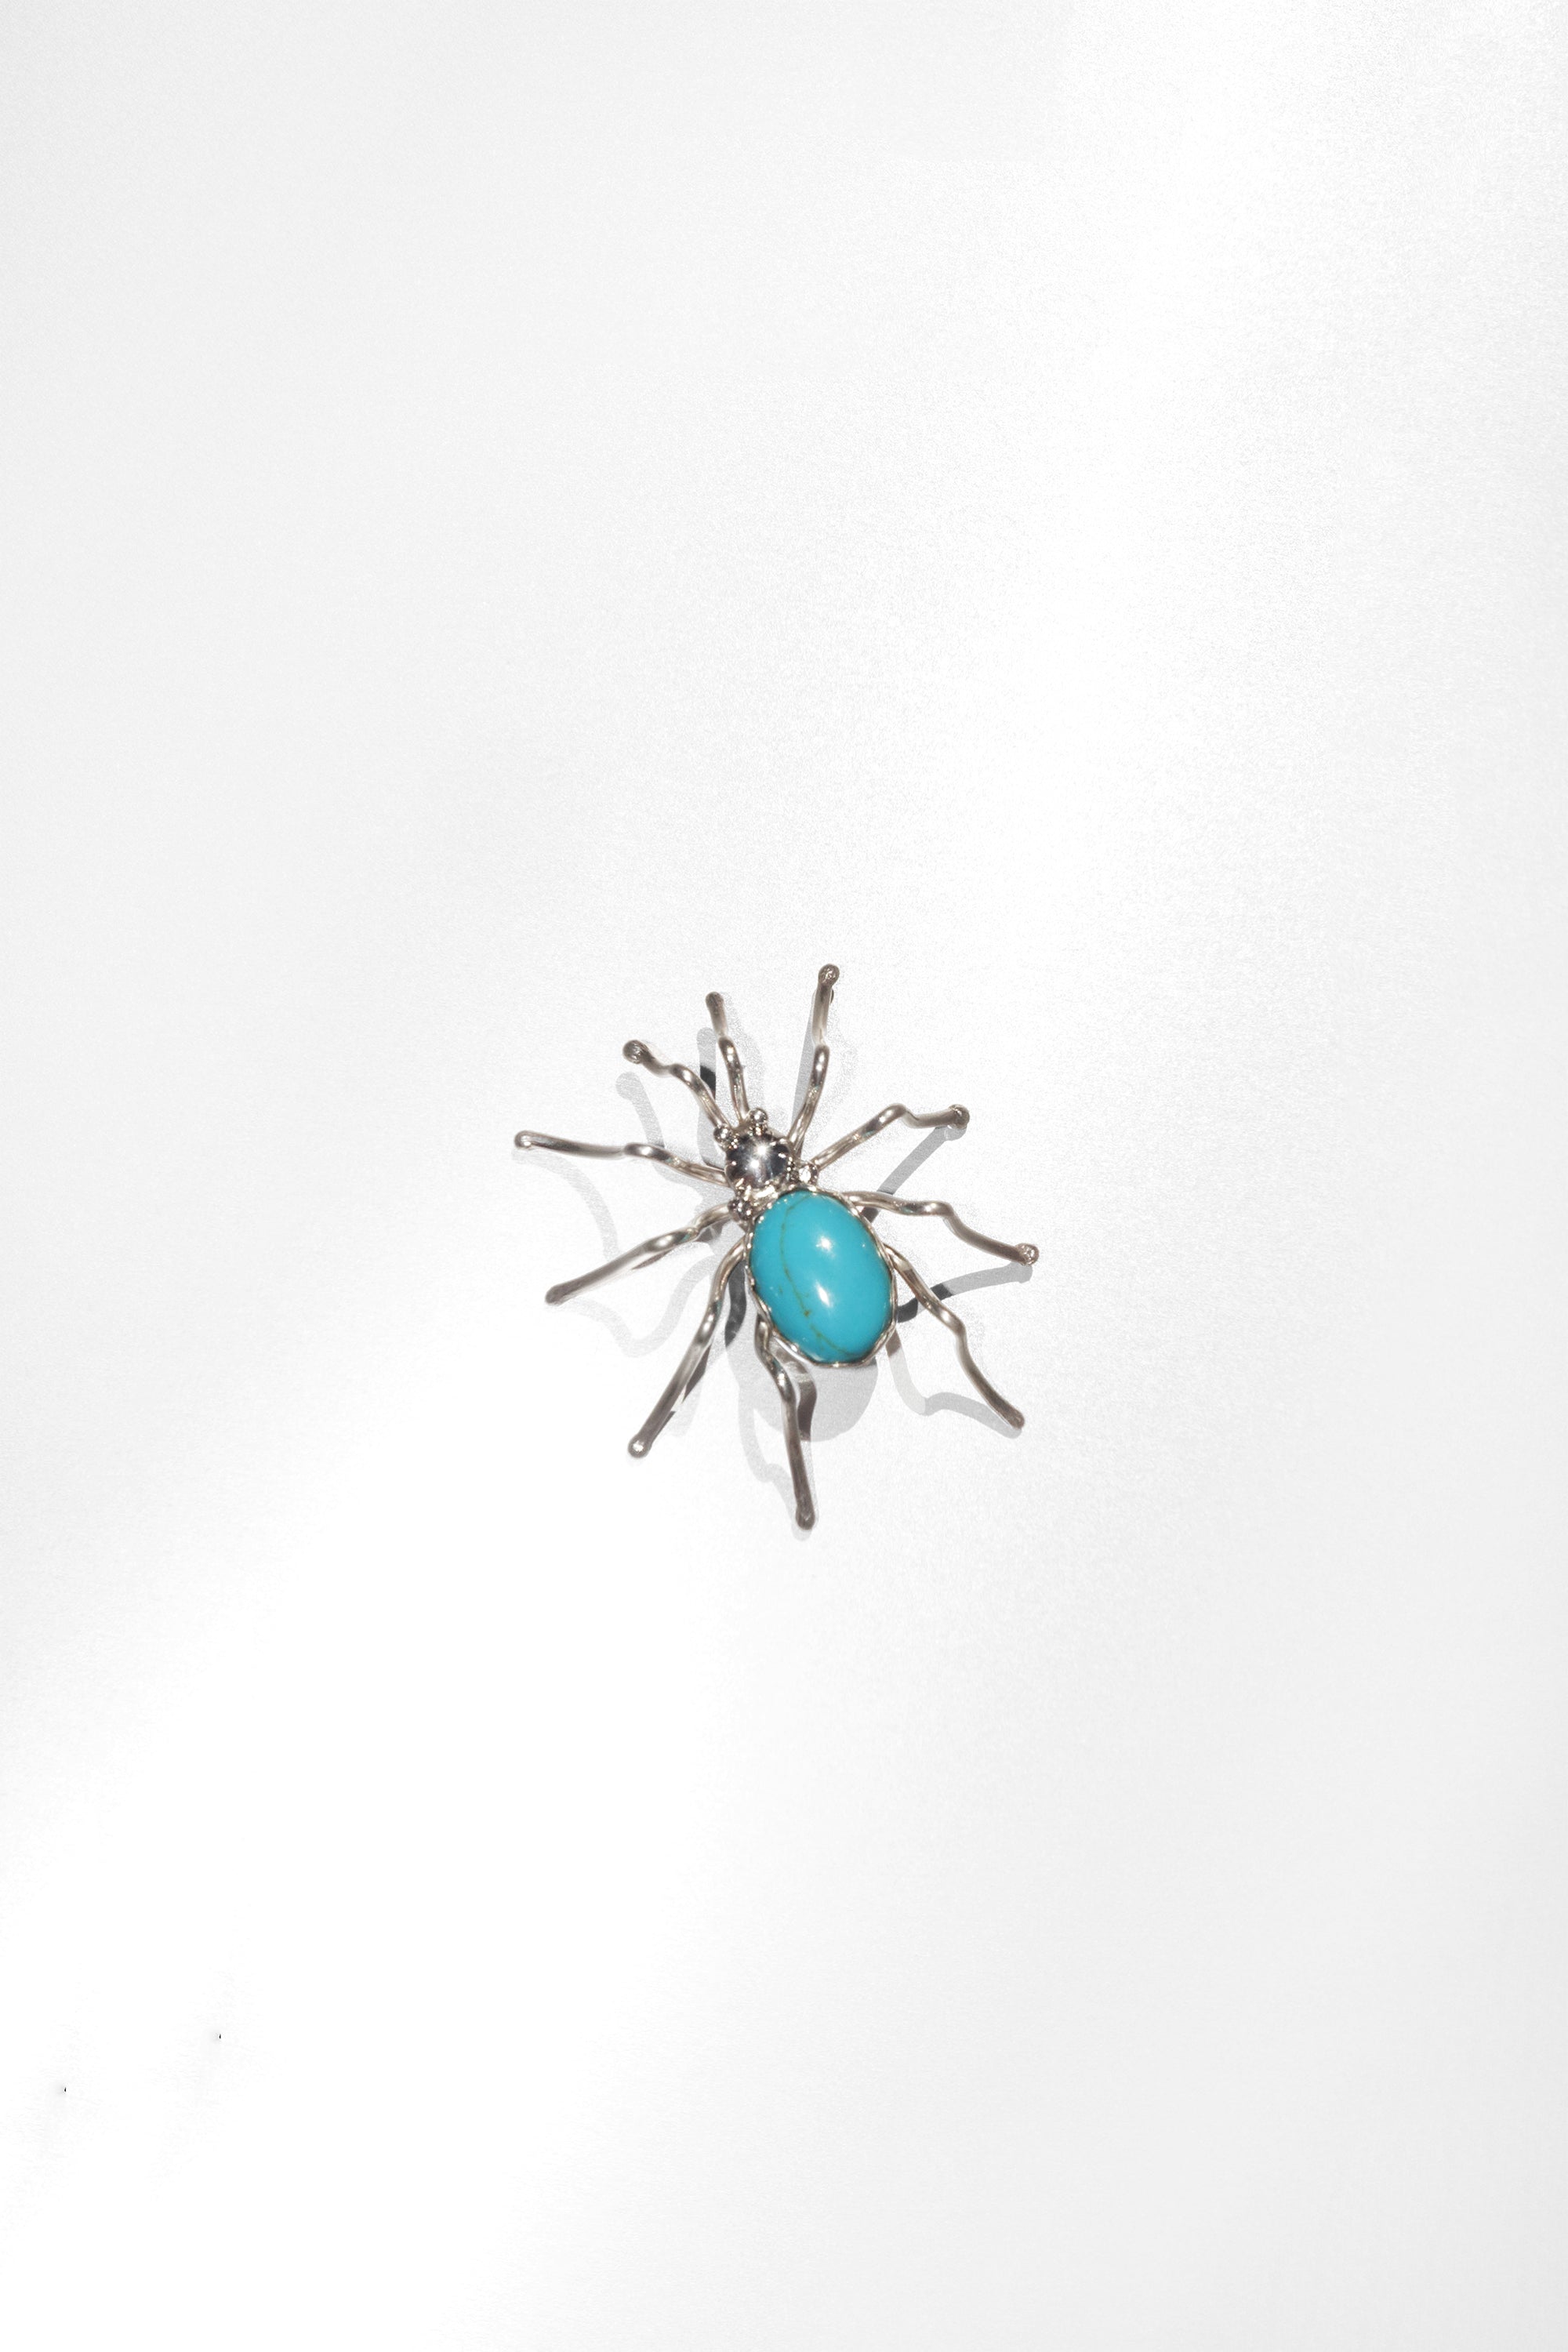 Turquoise Spider Pin